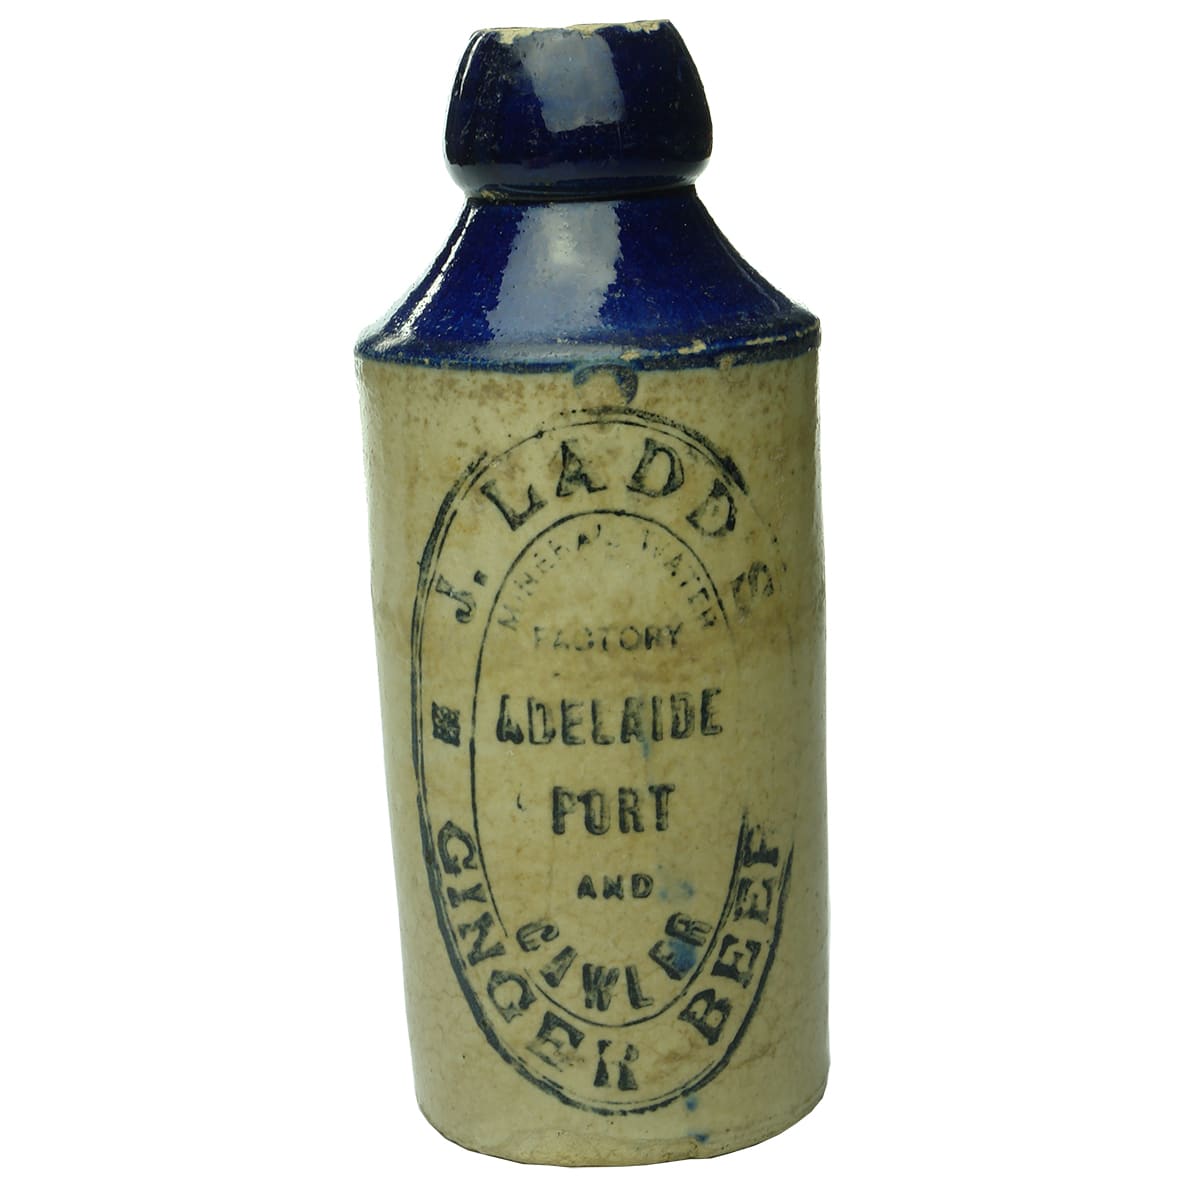 Ginger Beer. J. Ladd's, Adelaide, Port and Gawler. No trade mark. Cork stopper. Blue Top. 10 oz.